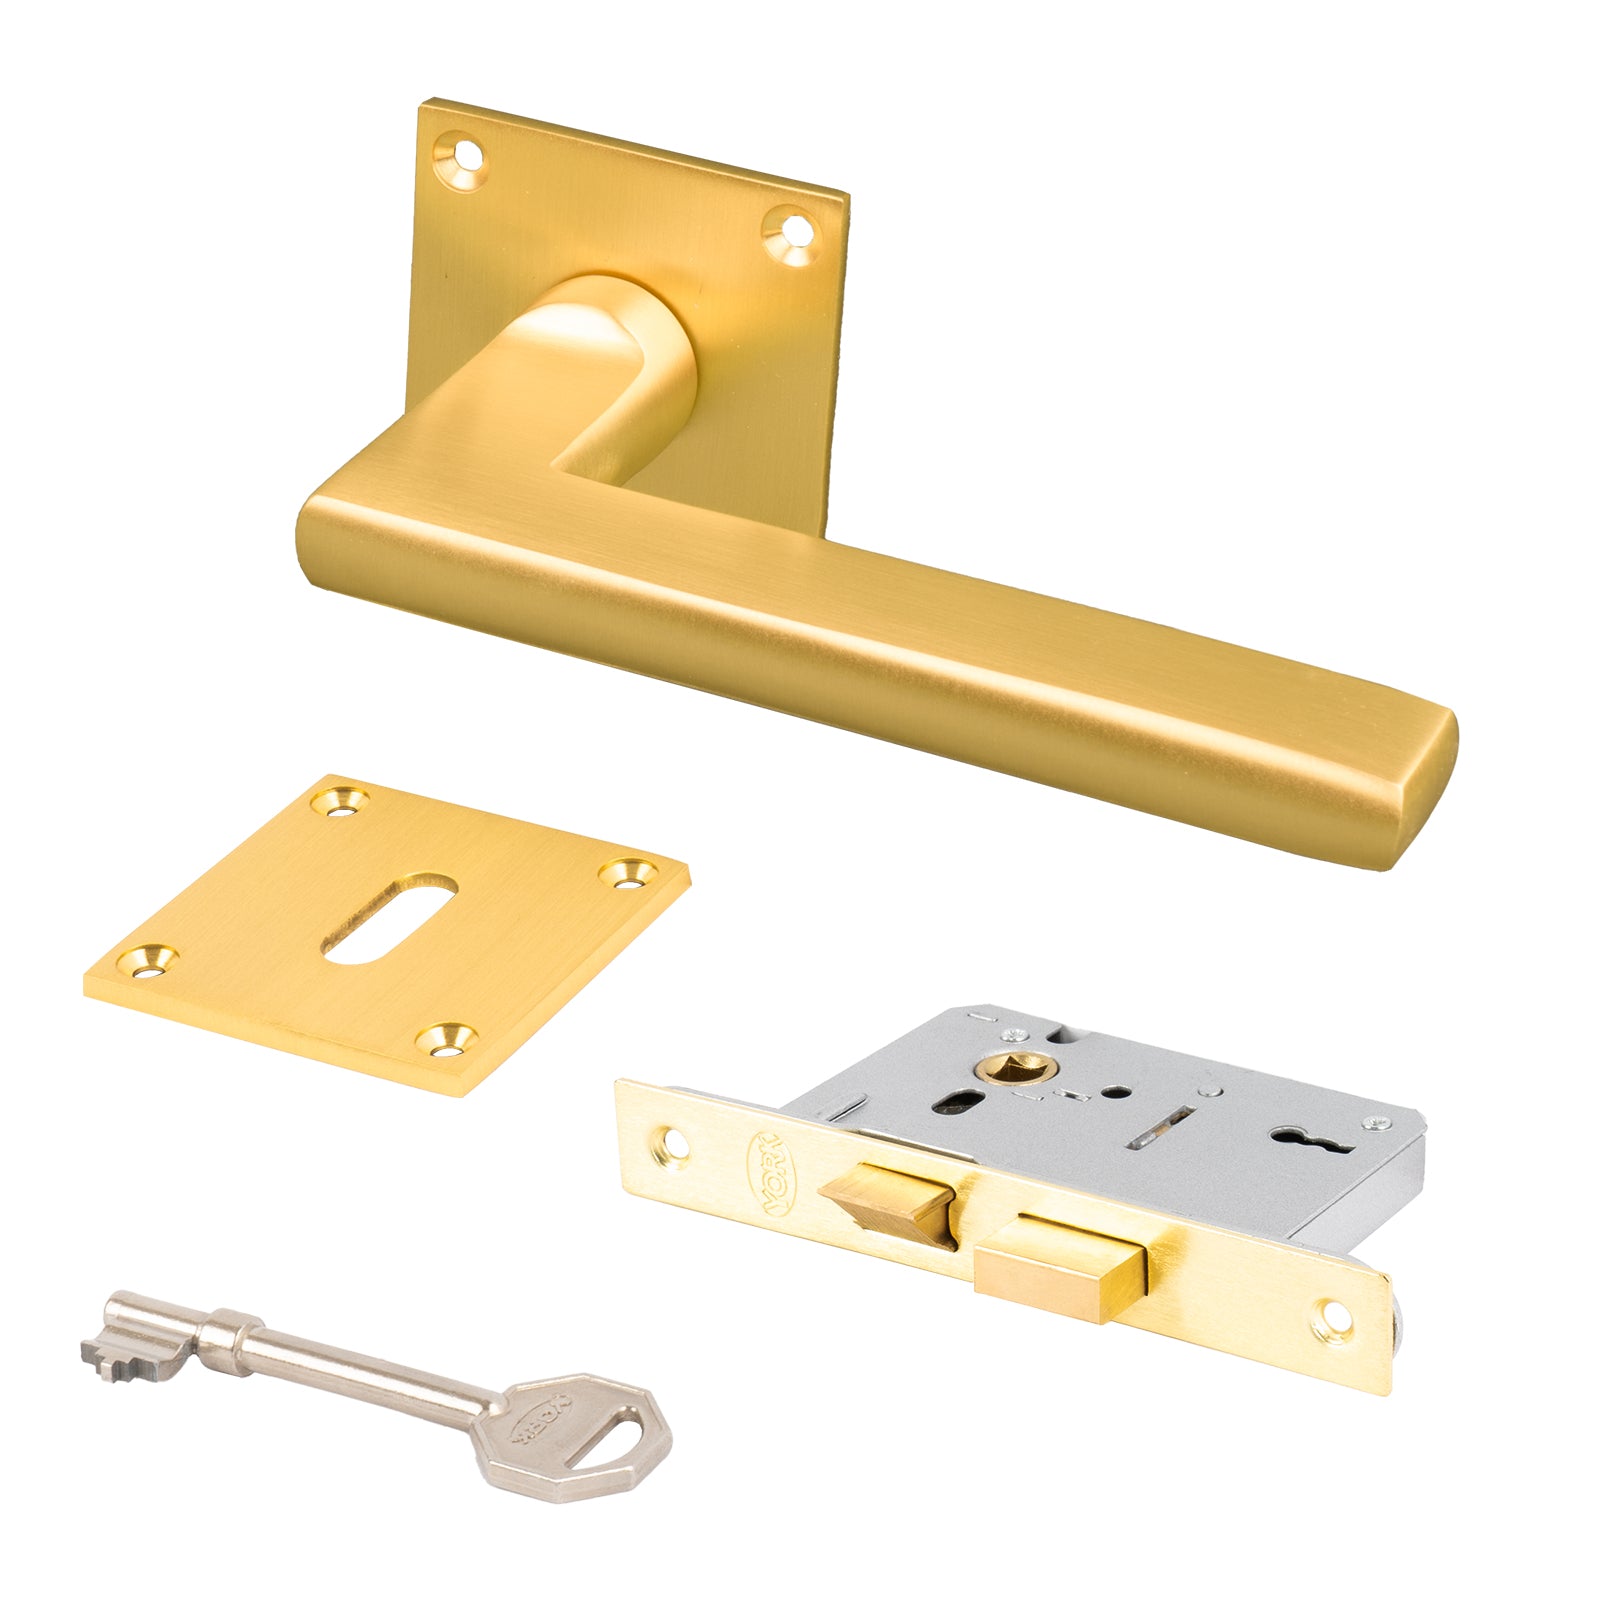 SHOW Trident Square Rose Door Handles 3 Lever Latch set with Satin Brass finish